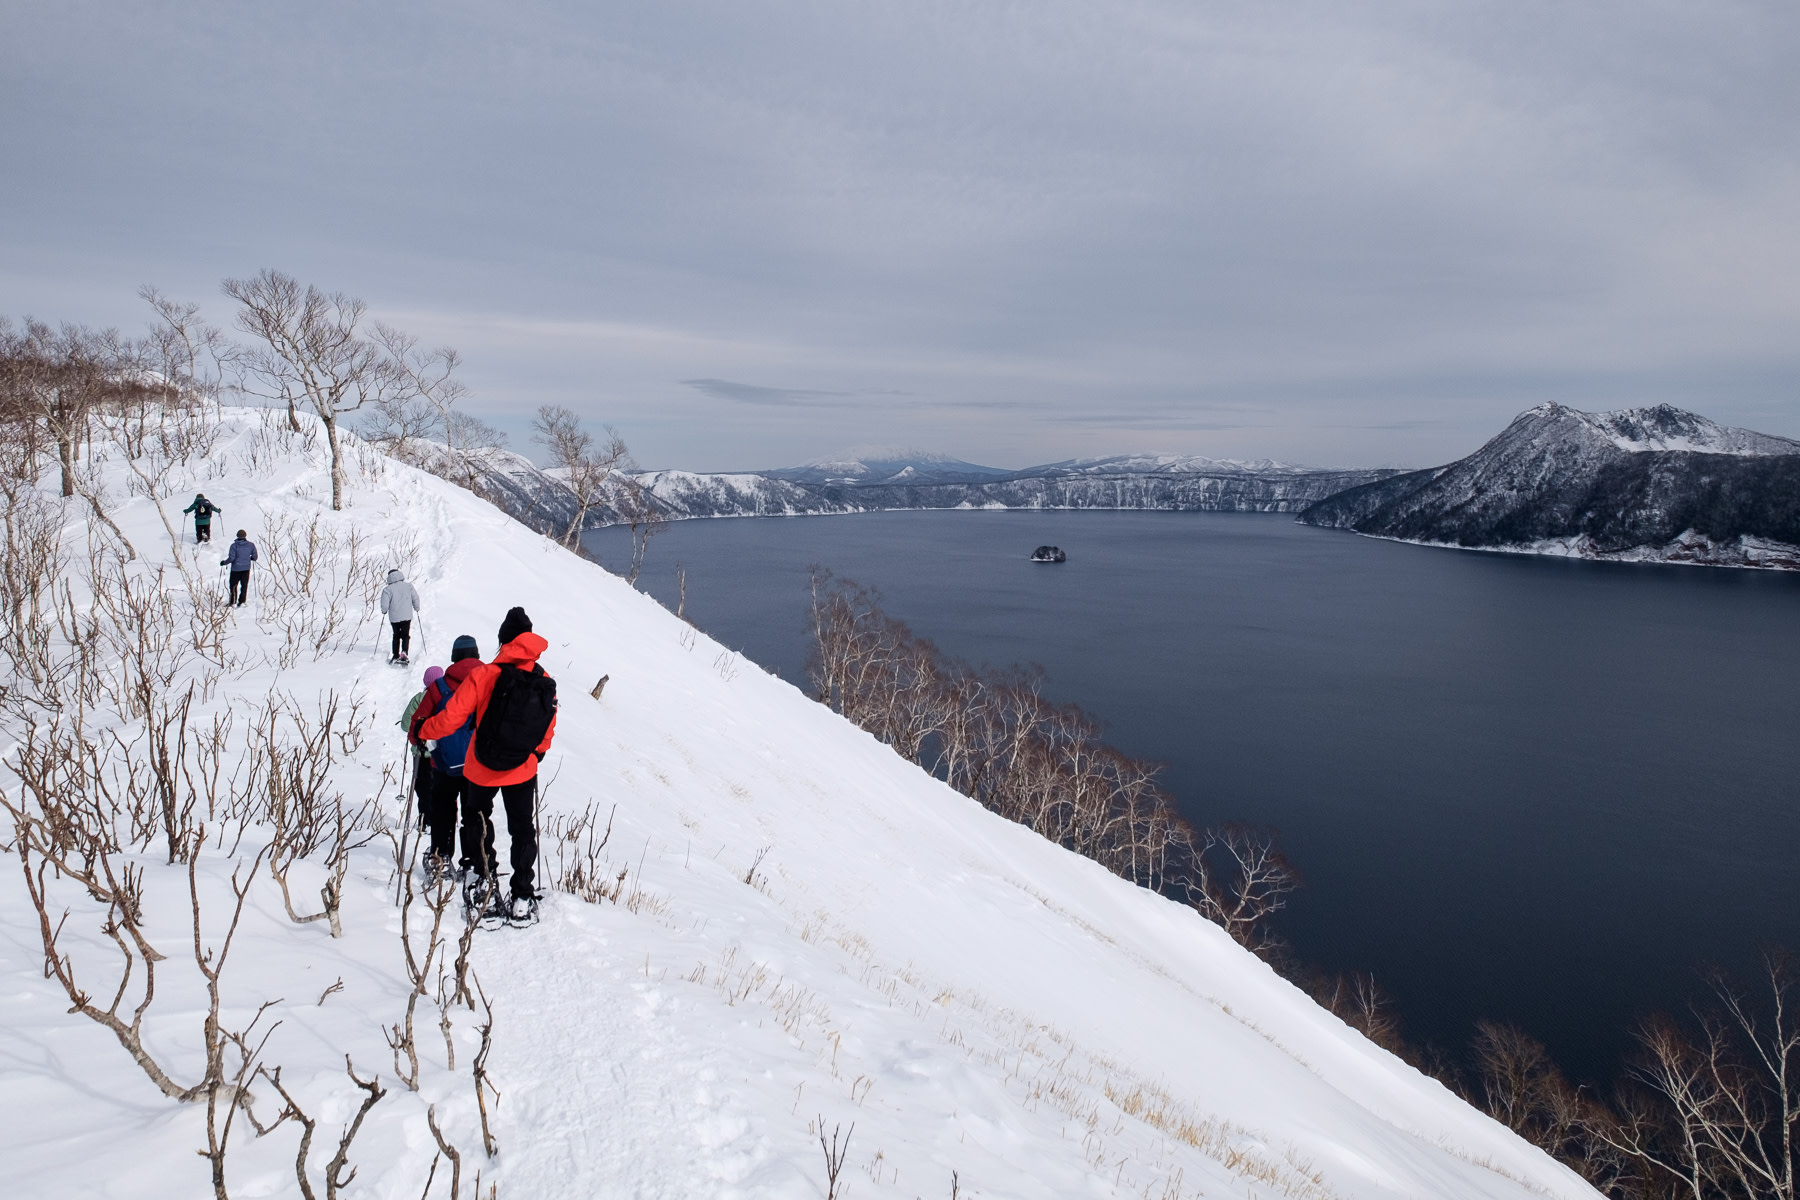 A snowshoeing group walks amongst birch trees along the edge of the Lake Mashu caldera. Hundreds of metres below the lake is still and a steel grey under an overcast sky. In the distance Mt Mashu can be seen rising above the opposite side of the lake.